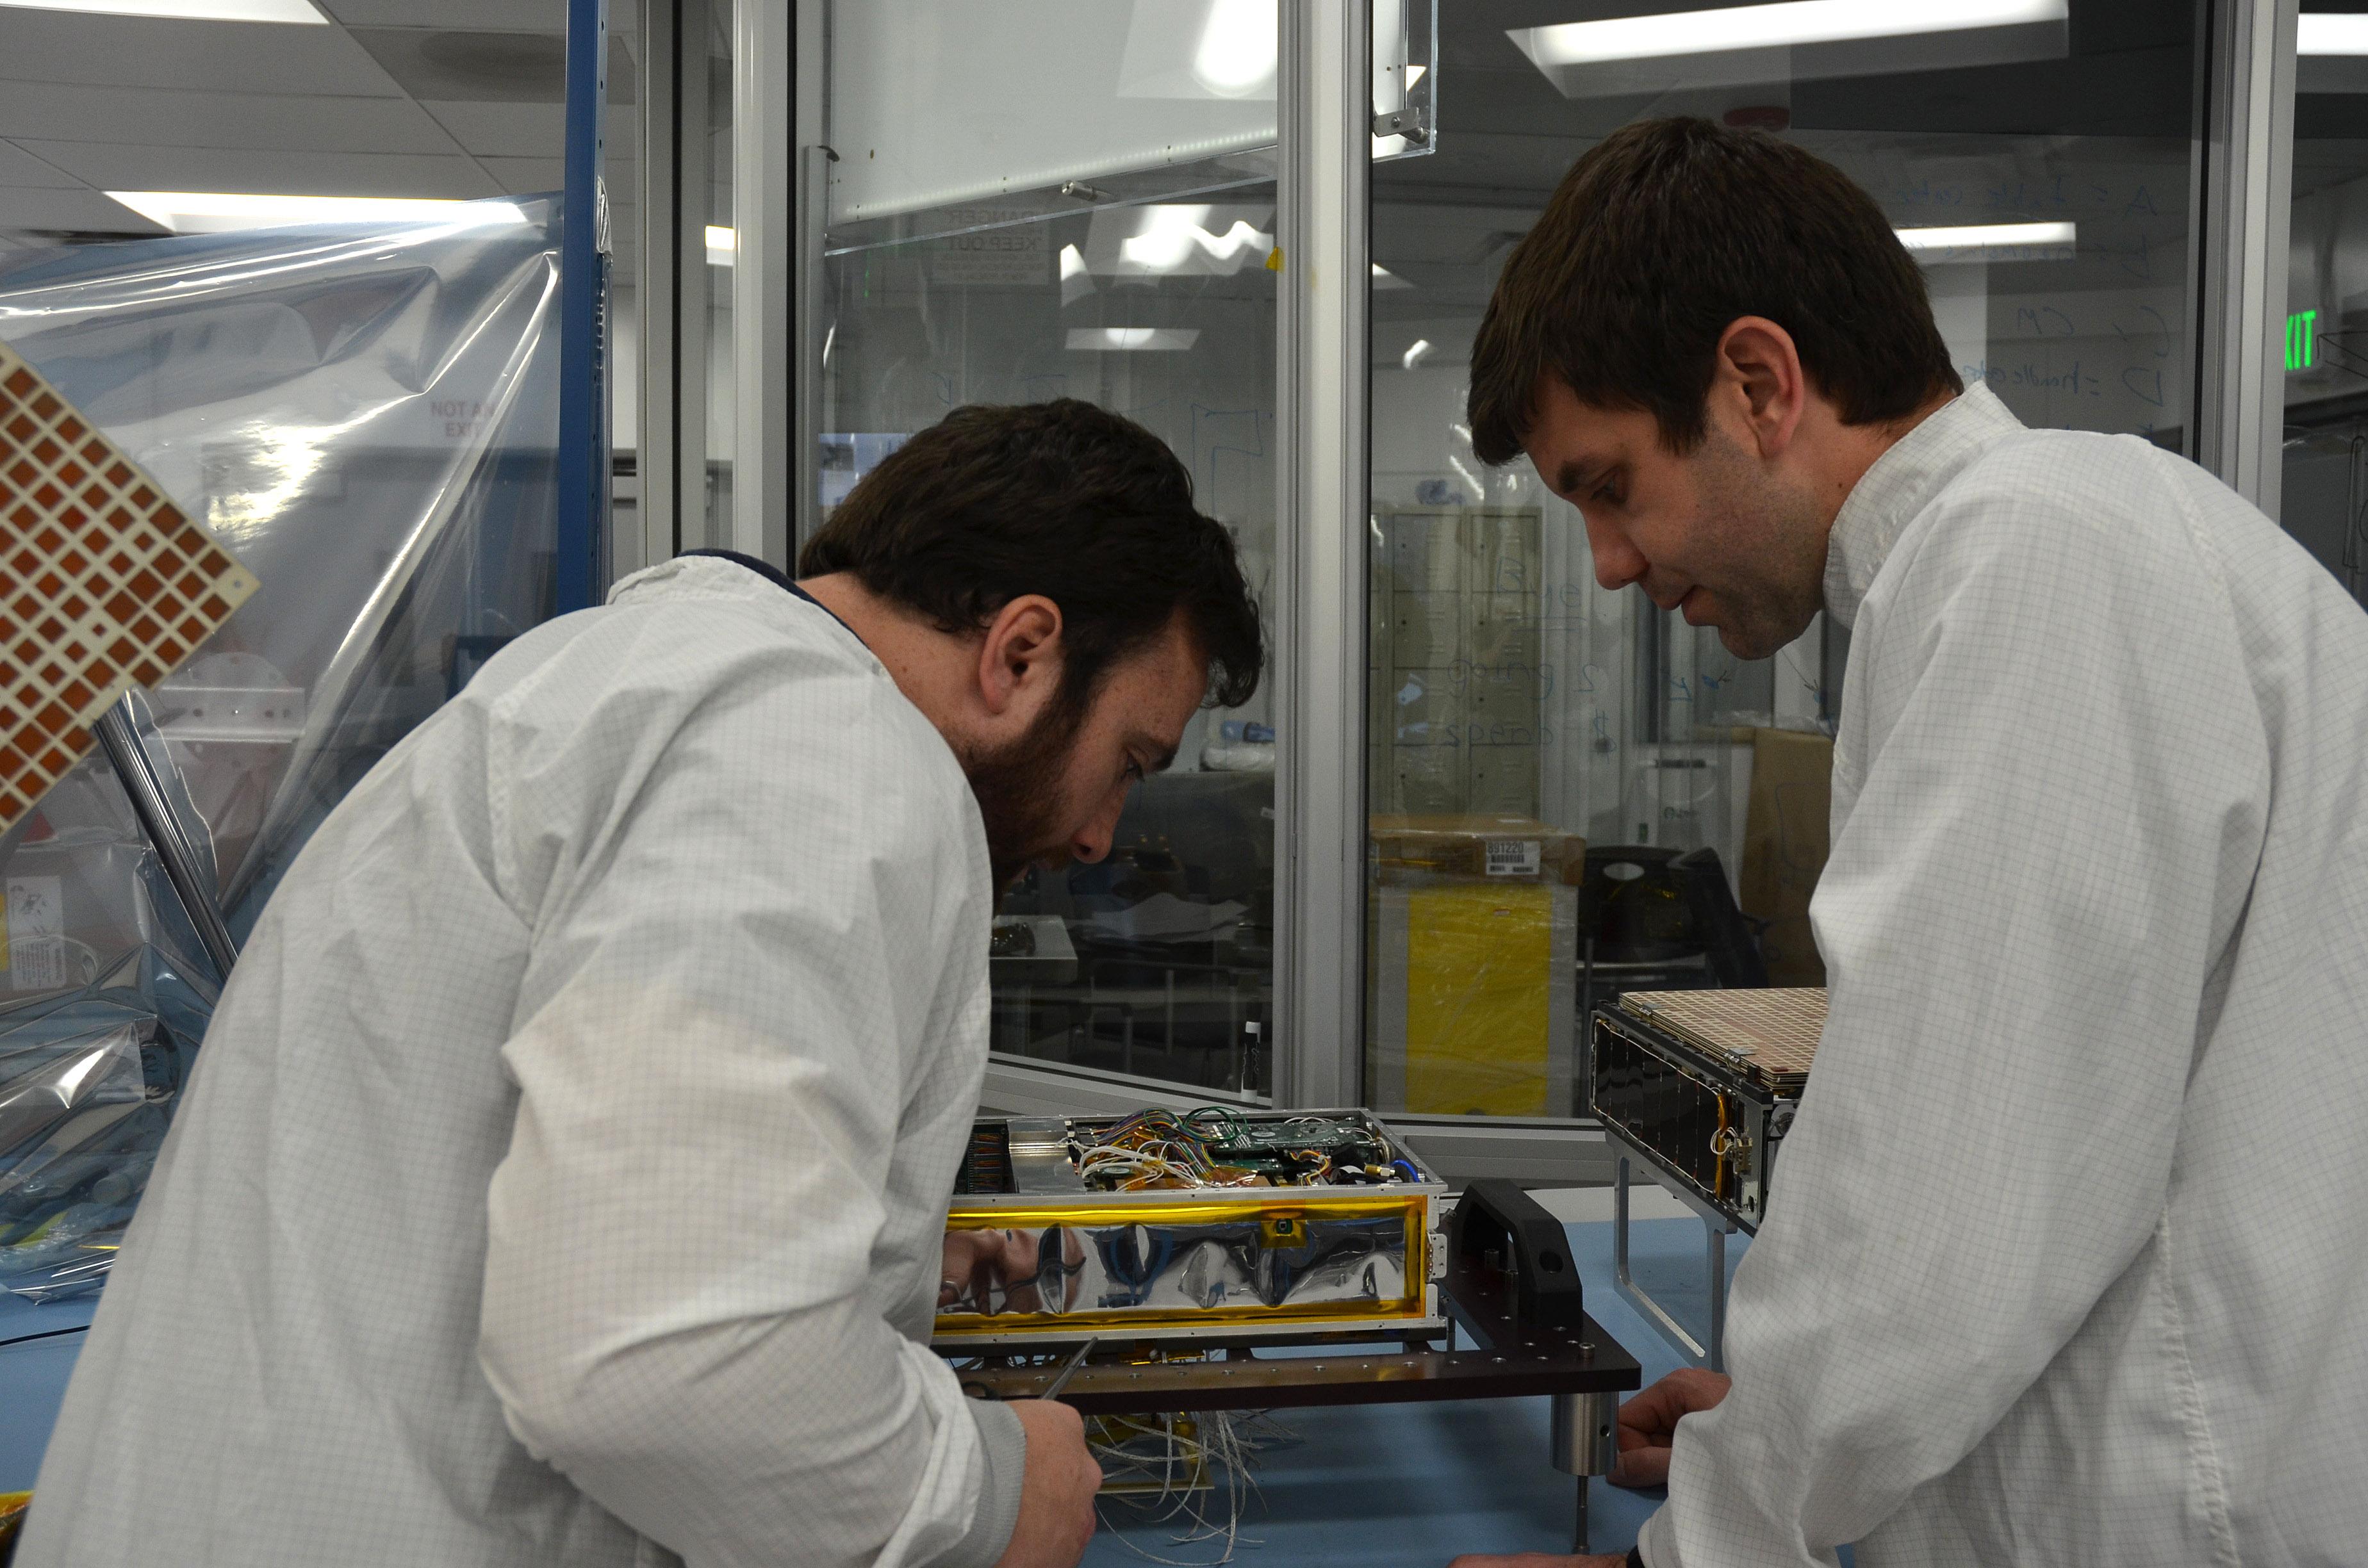 Engineers for NASA's MarCO (Mars Cube One) technology demonstration inspect one of the two MarCO CubeSats. Joel Steinkraus, MarCO lead mechanical engineer, left, and Andy Klesh, MarCO chief engineer, are on the team at NASA's Jet Propulsion Laboratory, Pasadena, California, preparing twin MarCO CubeSats.